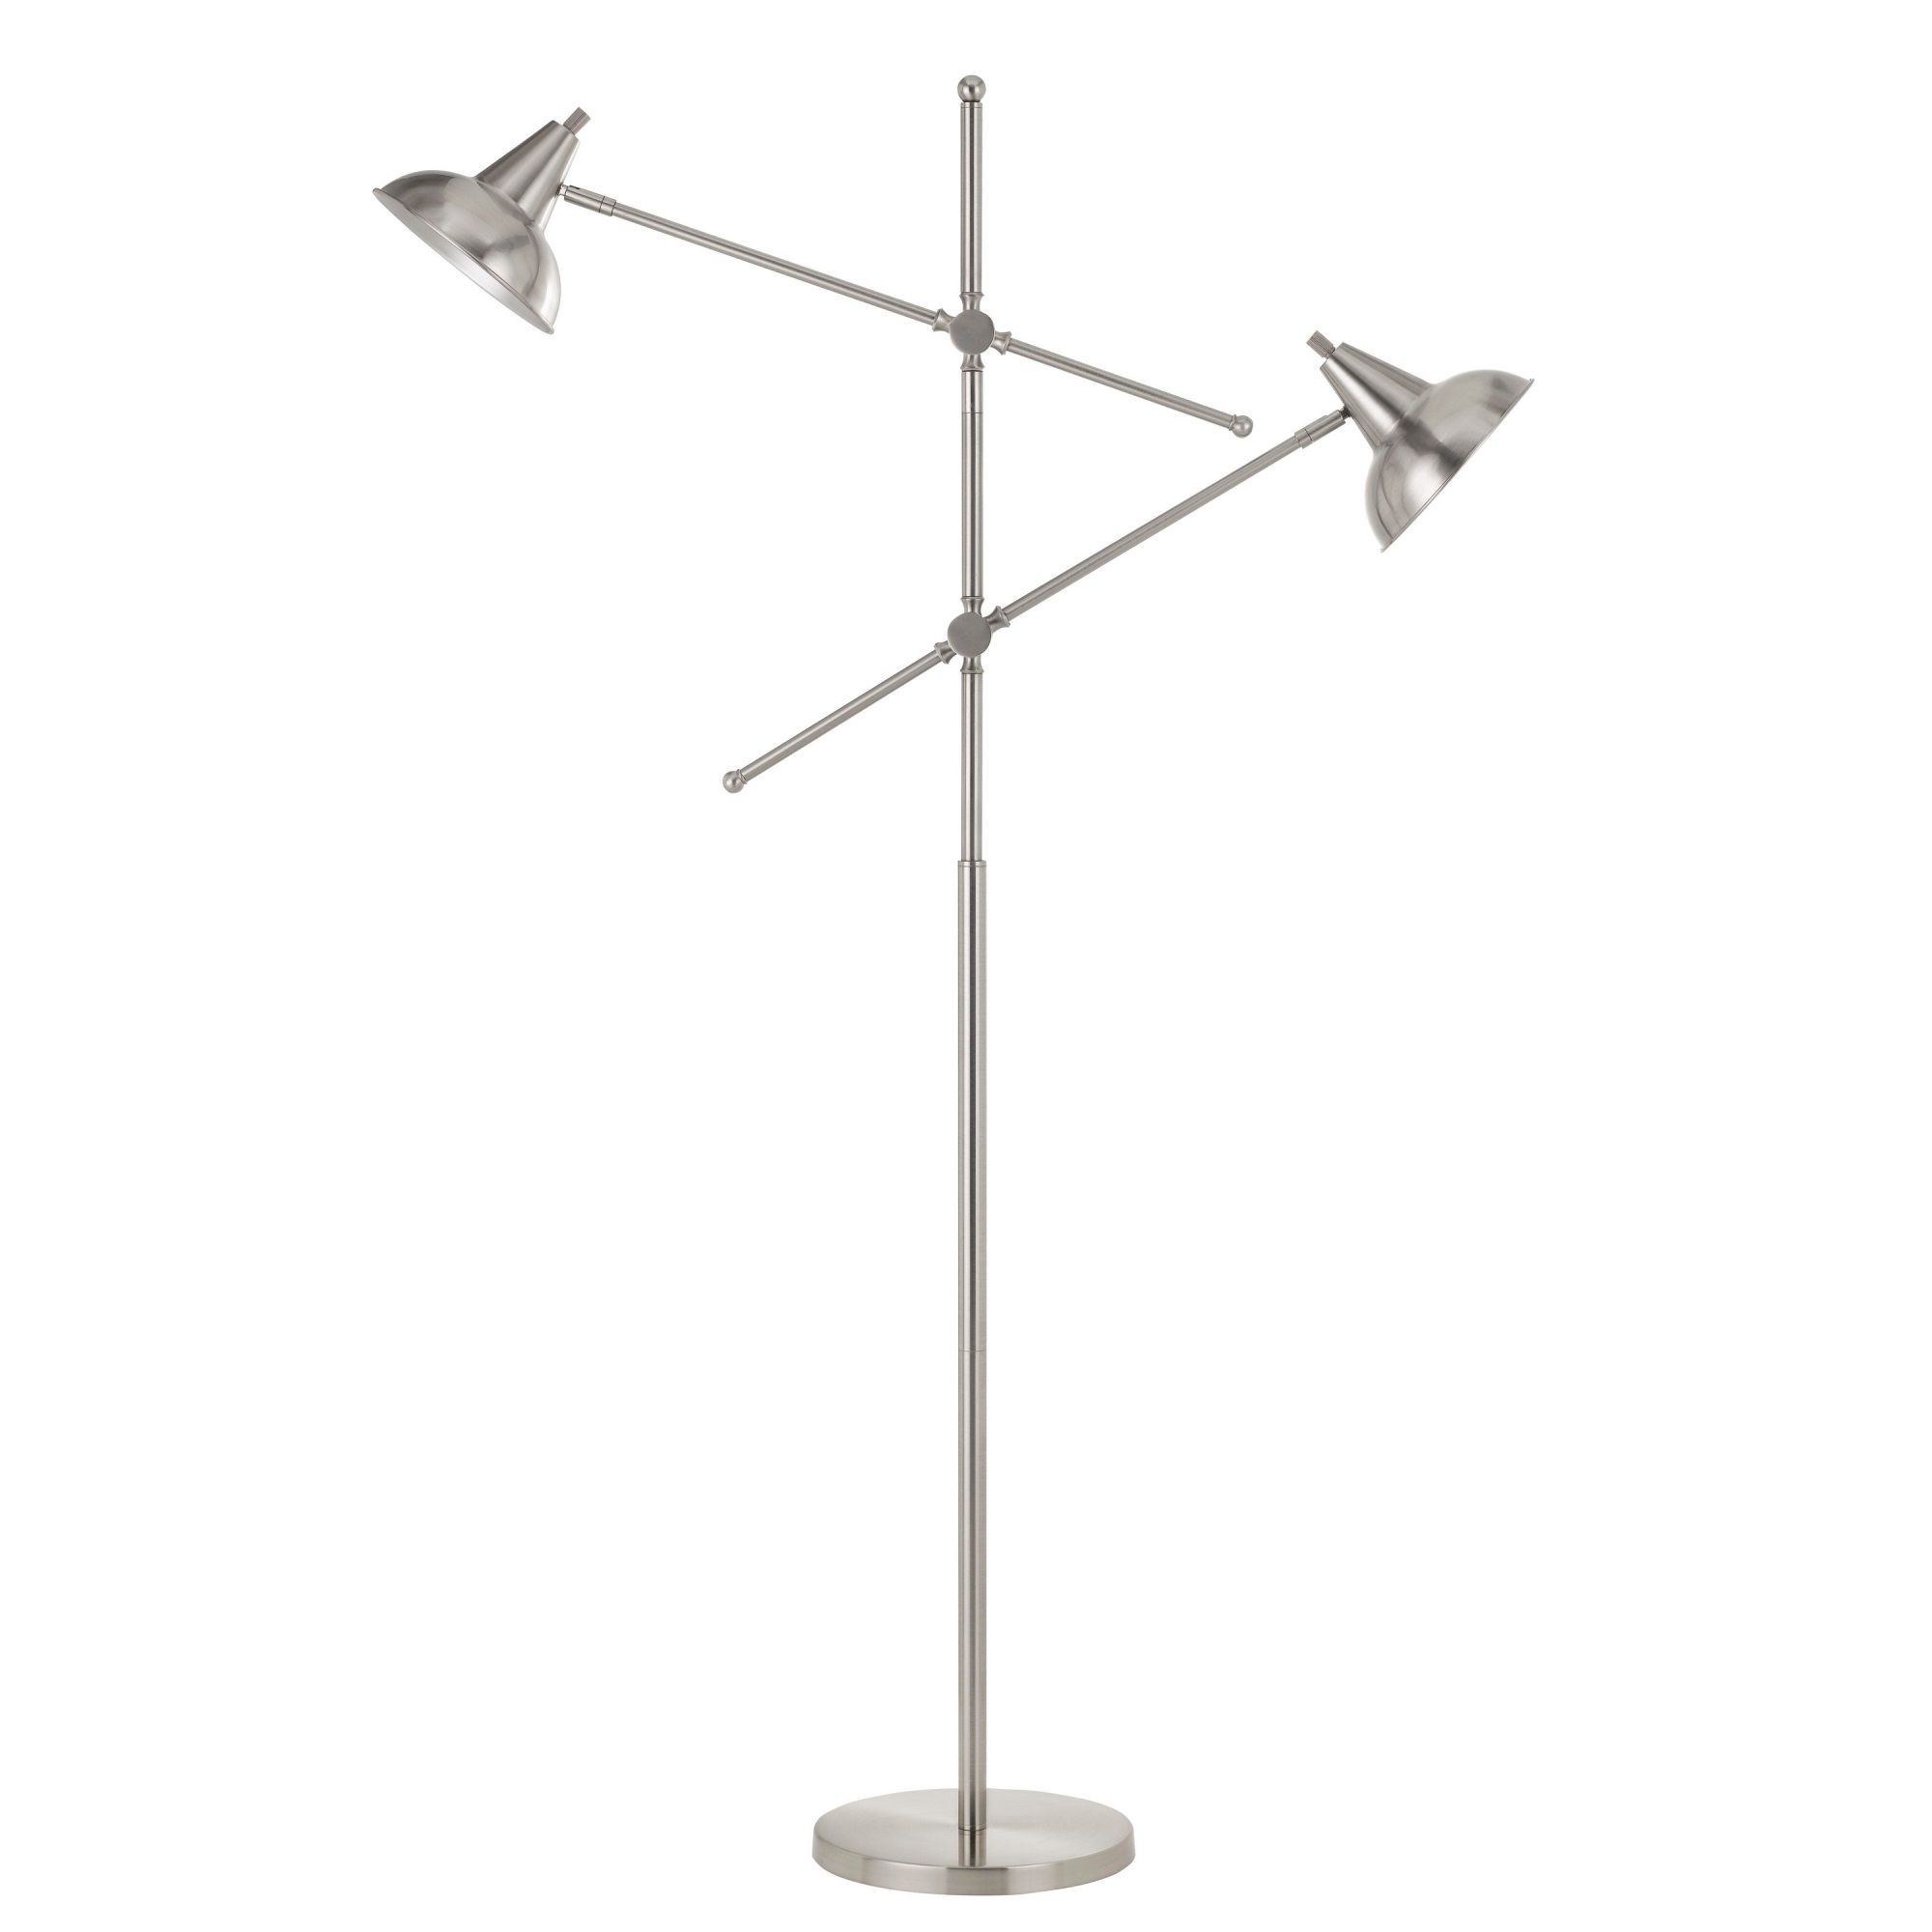 2 Arm Floor Lamps Within Widely Used Tubular Metal Body Floor Lamp With 2 Adjustable Arms, Silver – Walmart (View 15 of 15)